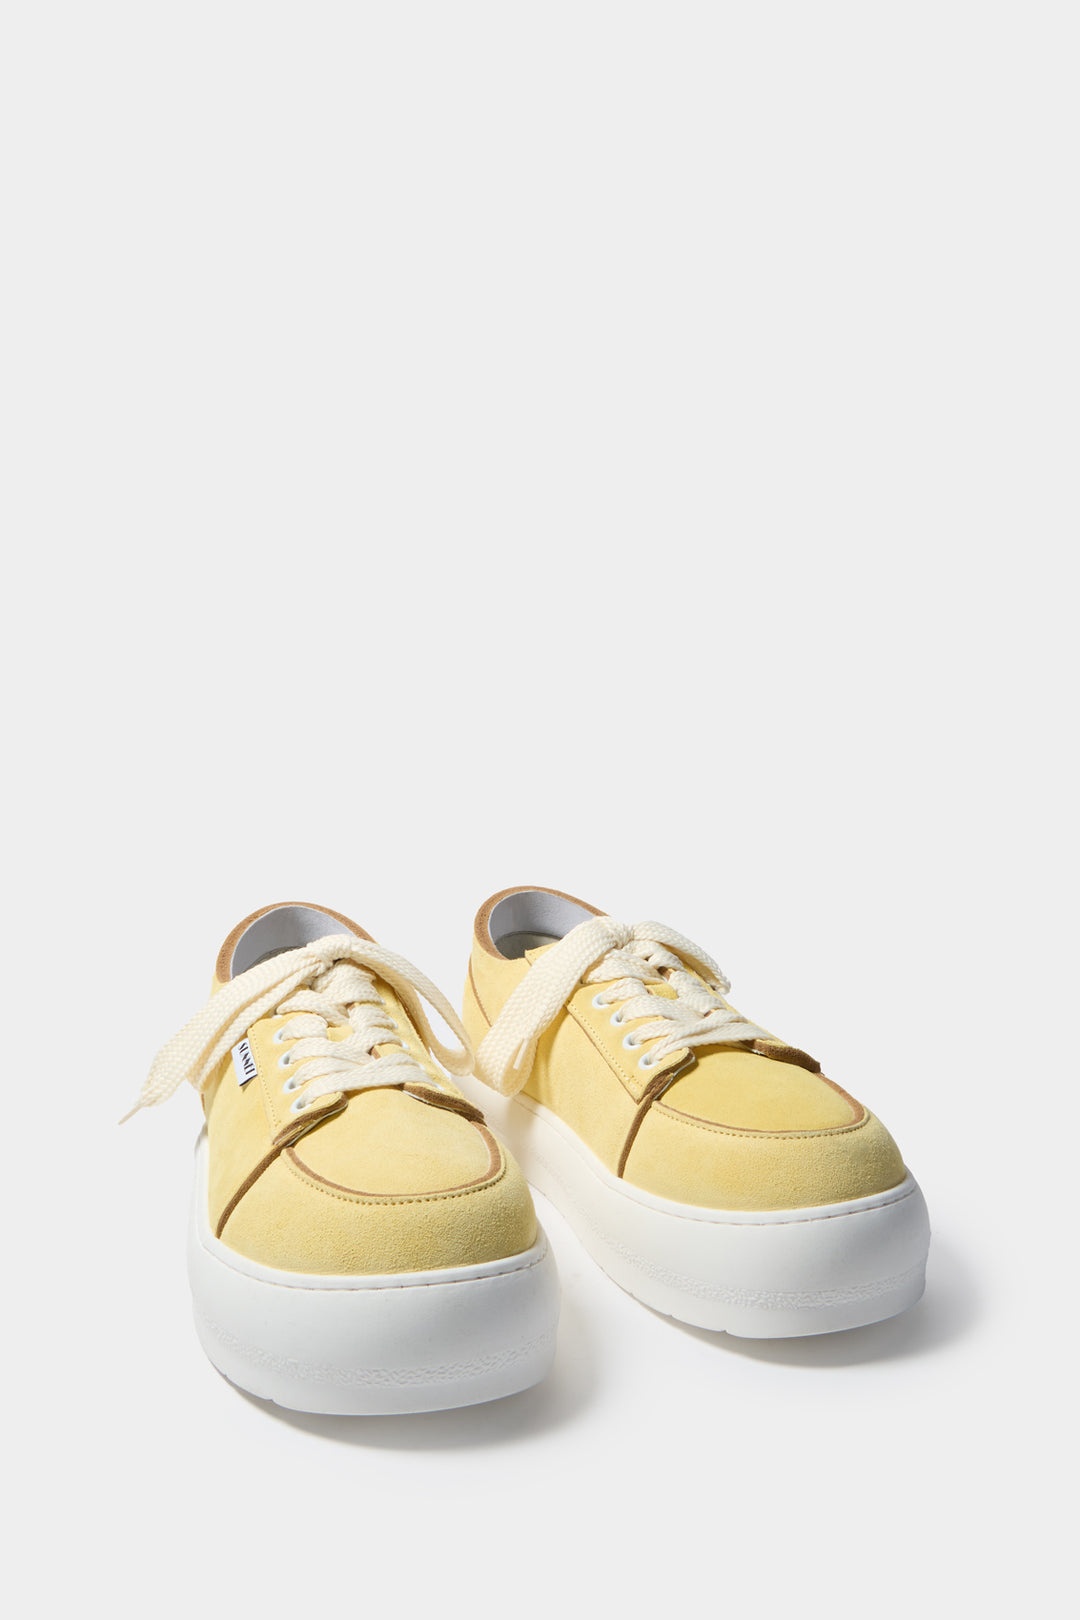 DREAMY SHOES / suede / light yellow - 2